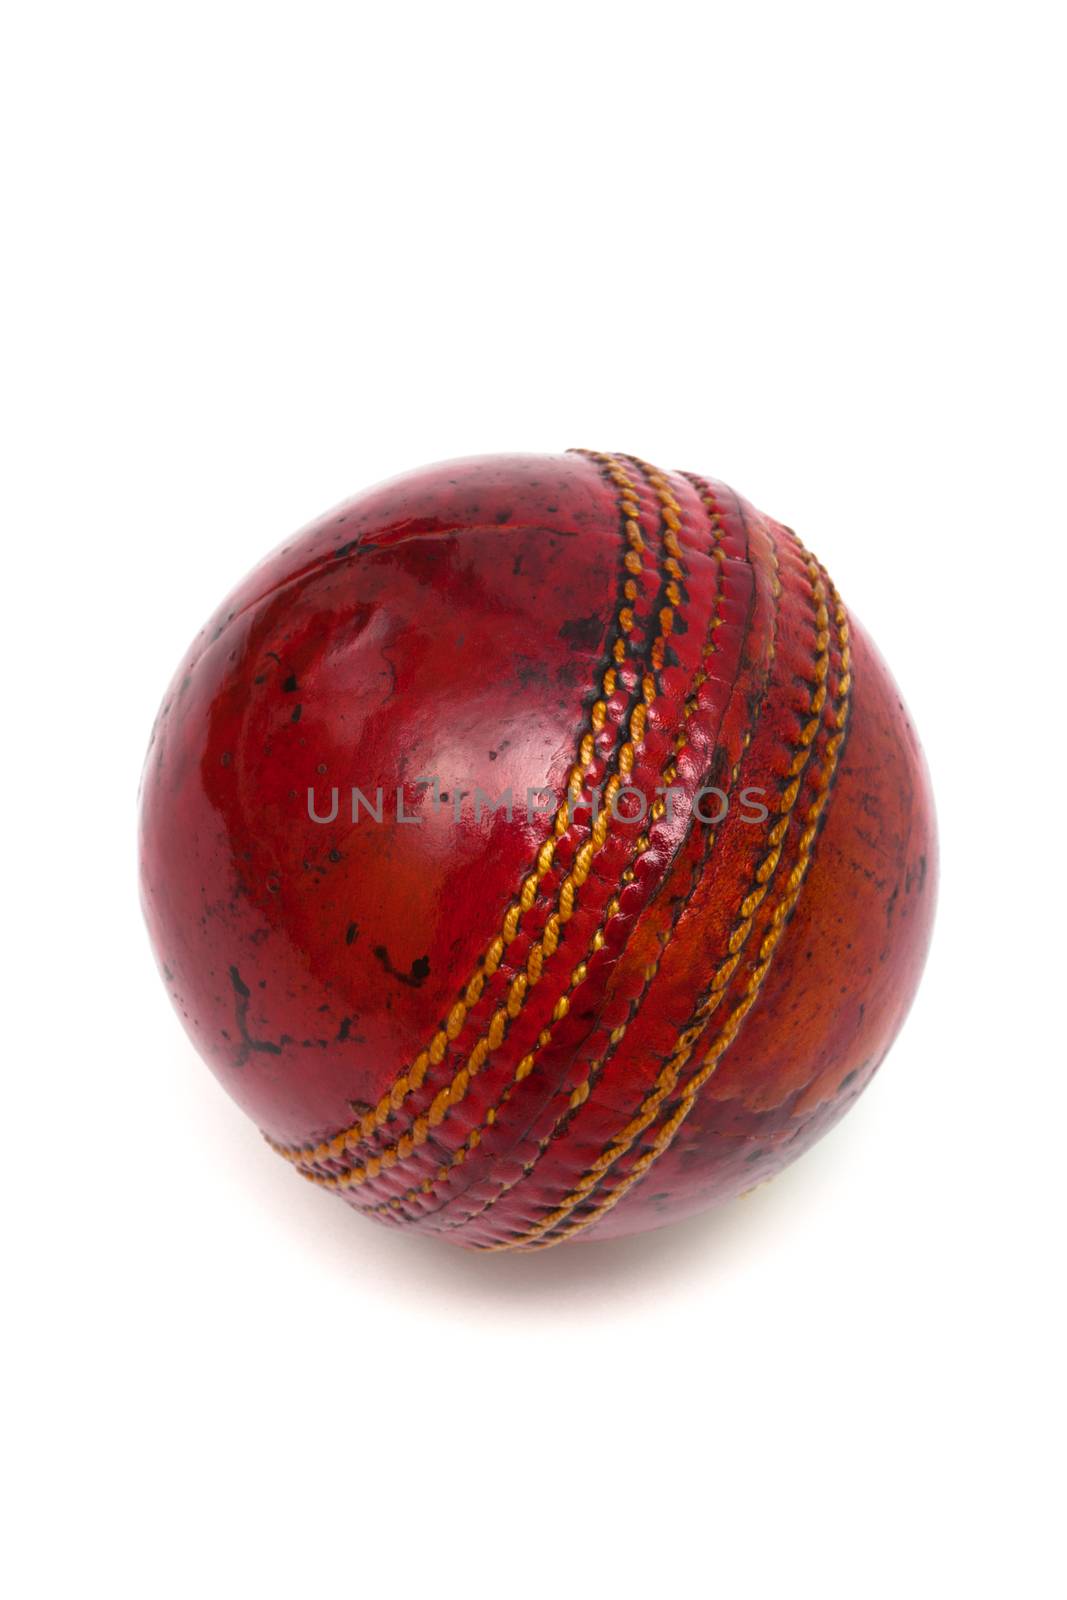 red ball cricket by terex